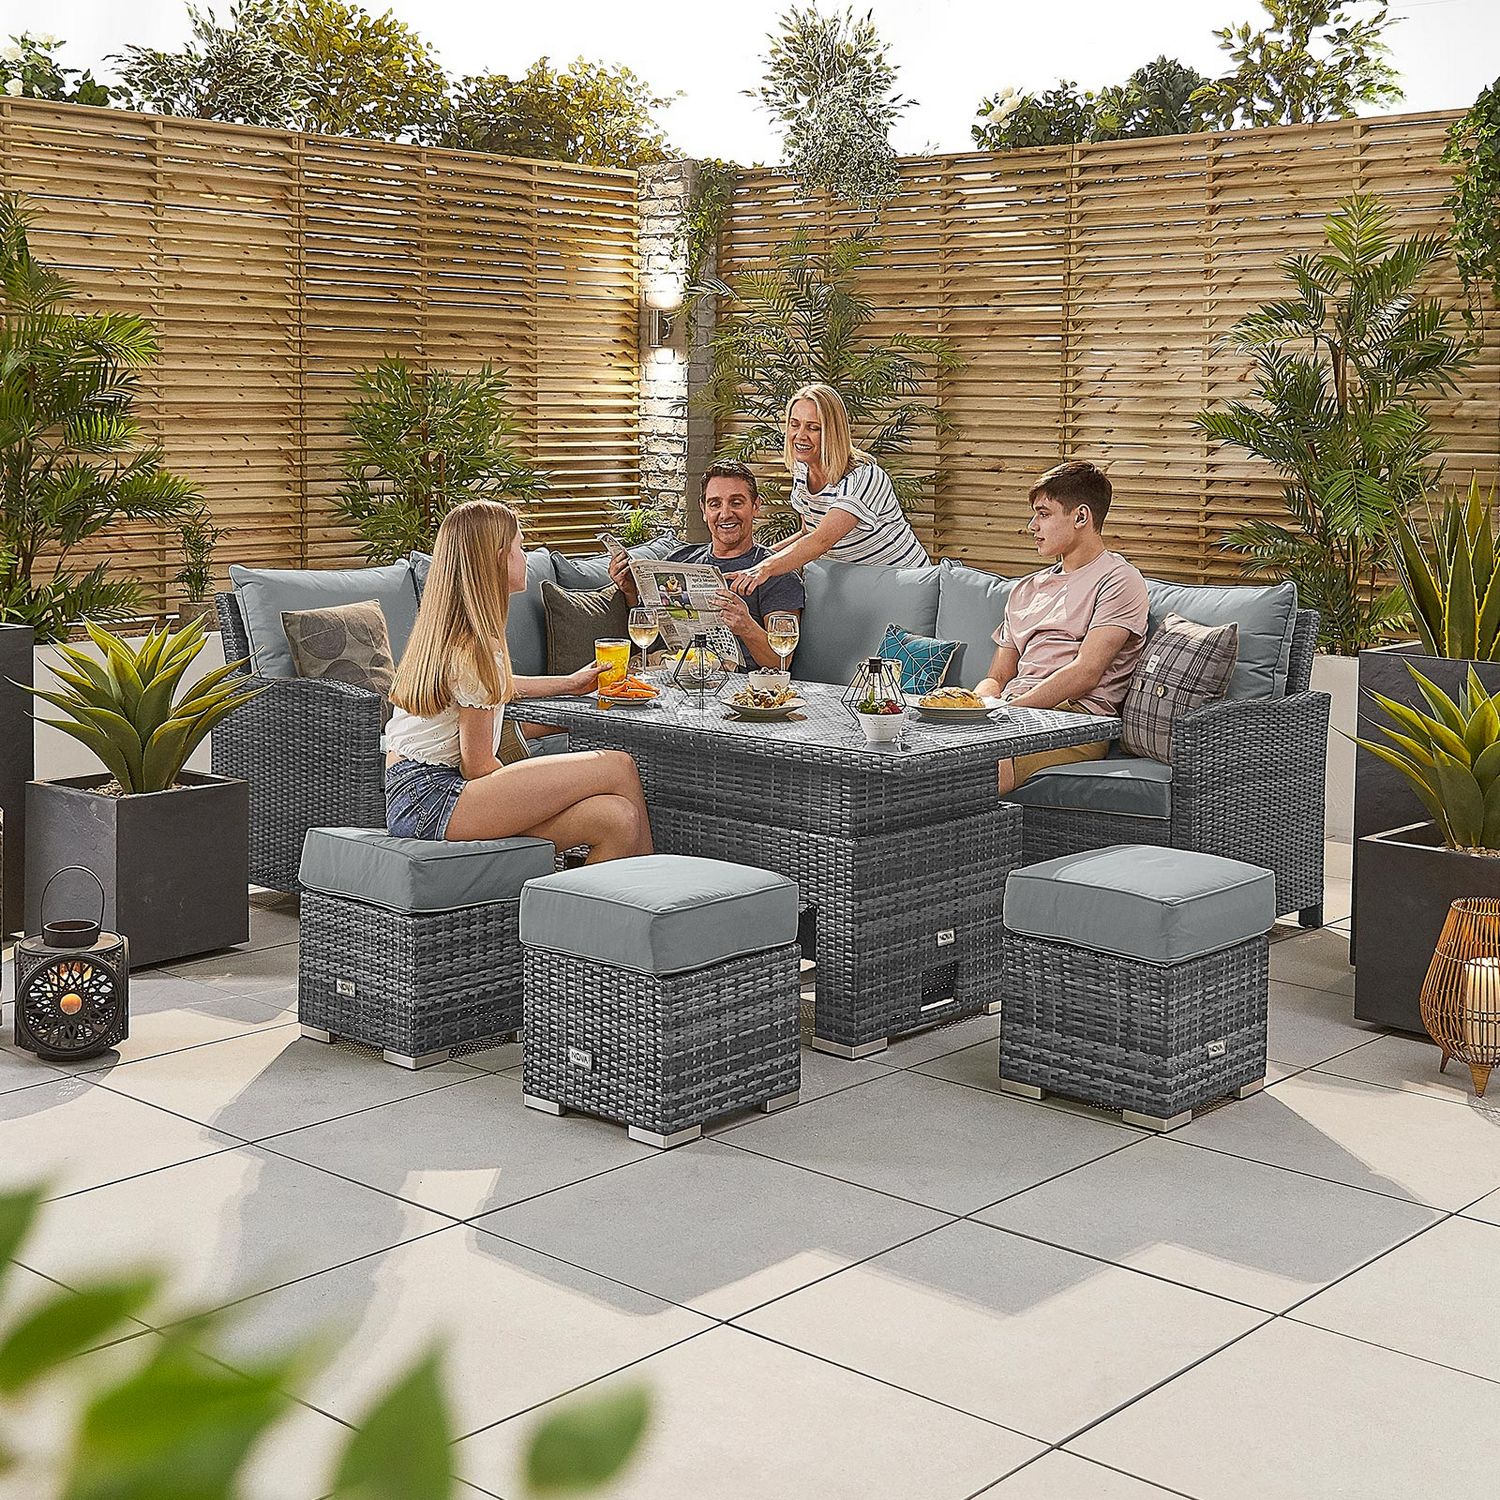 Nova Garden Furniture Cambridge Grey, Cambridge 4 Rattan Chairs And Small Round Dining Table Set In Grey